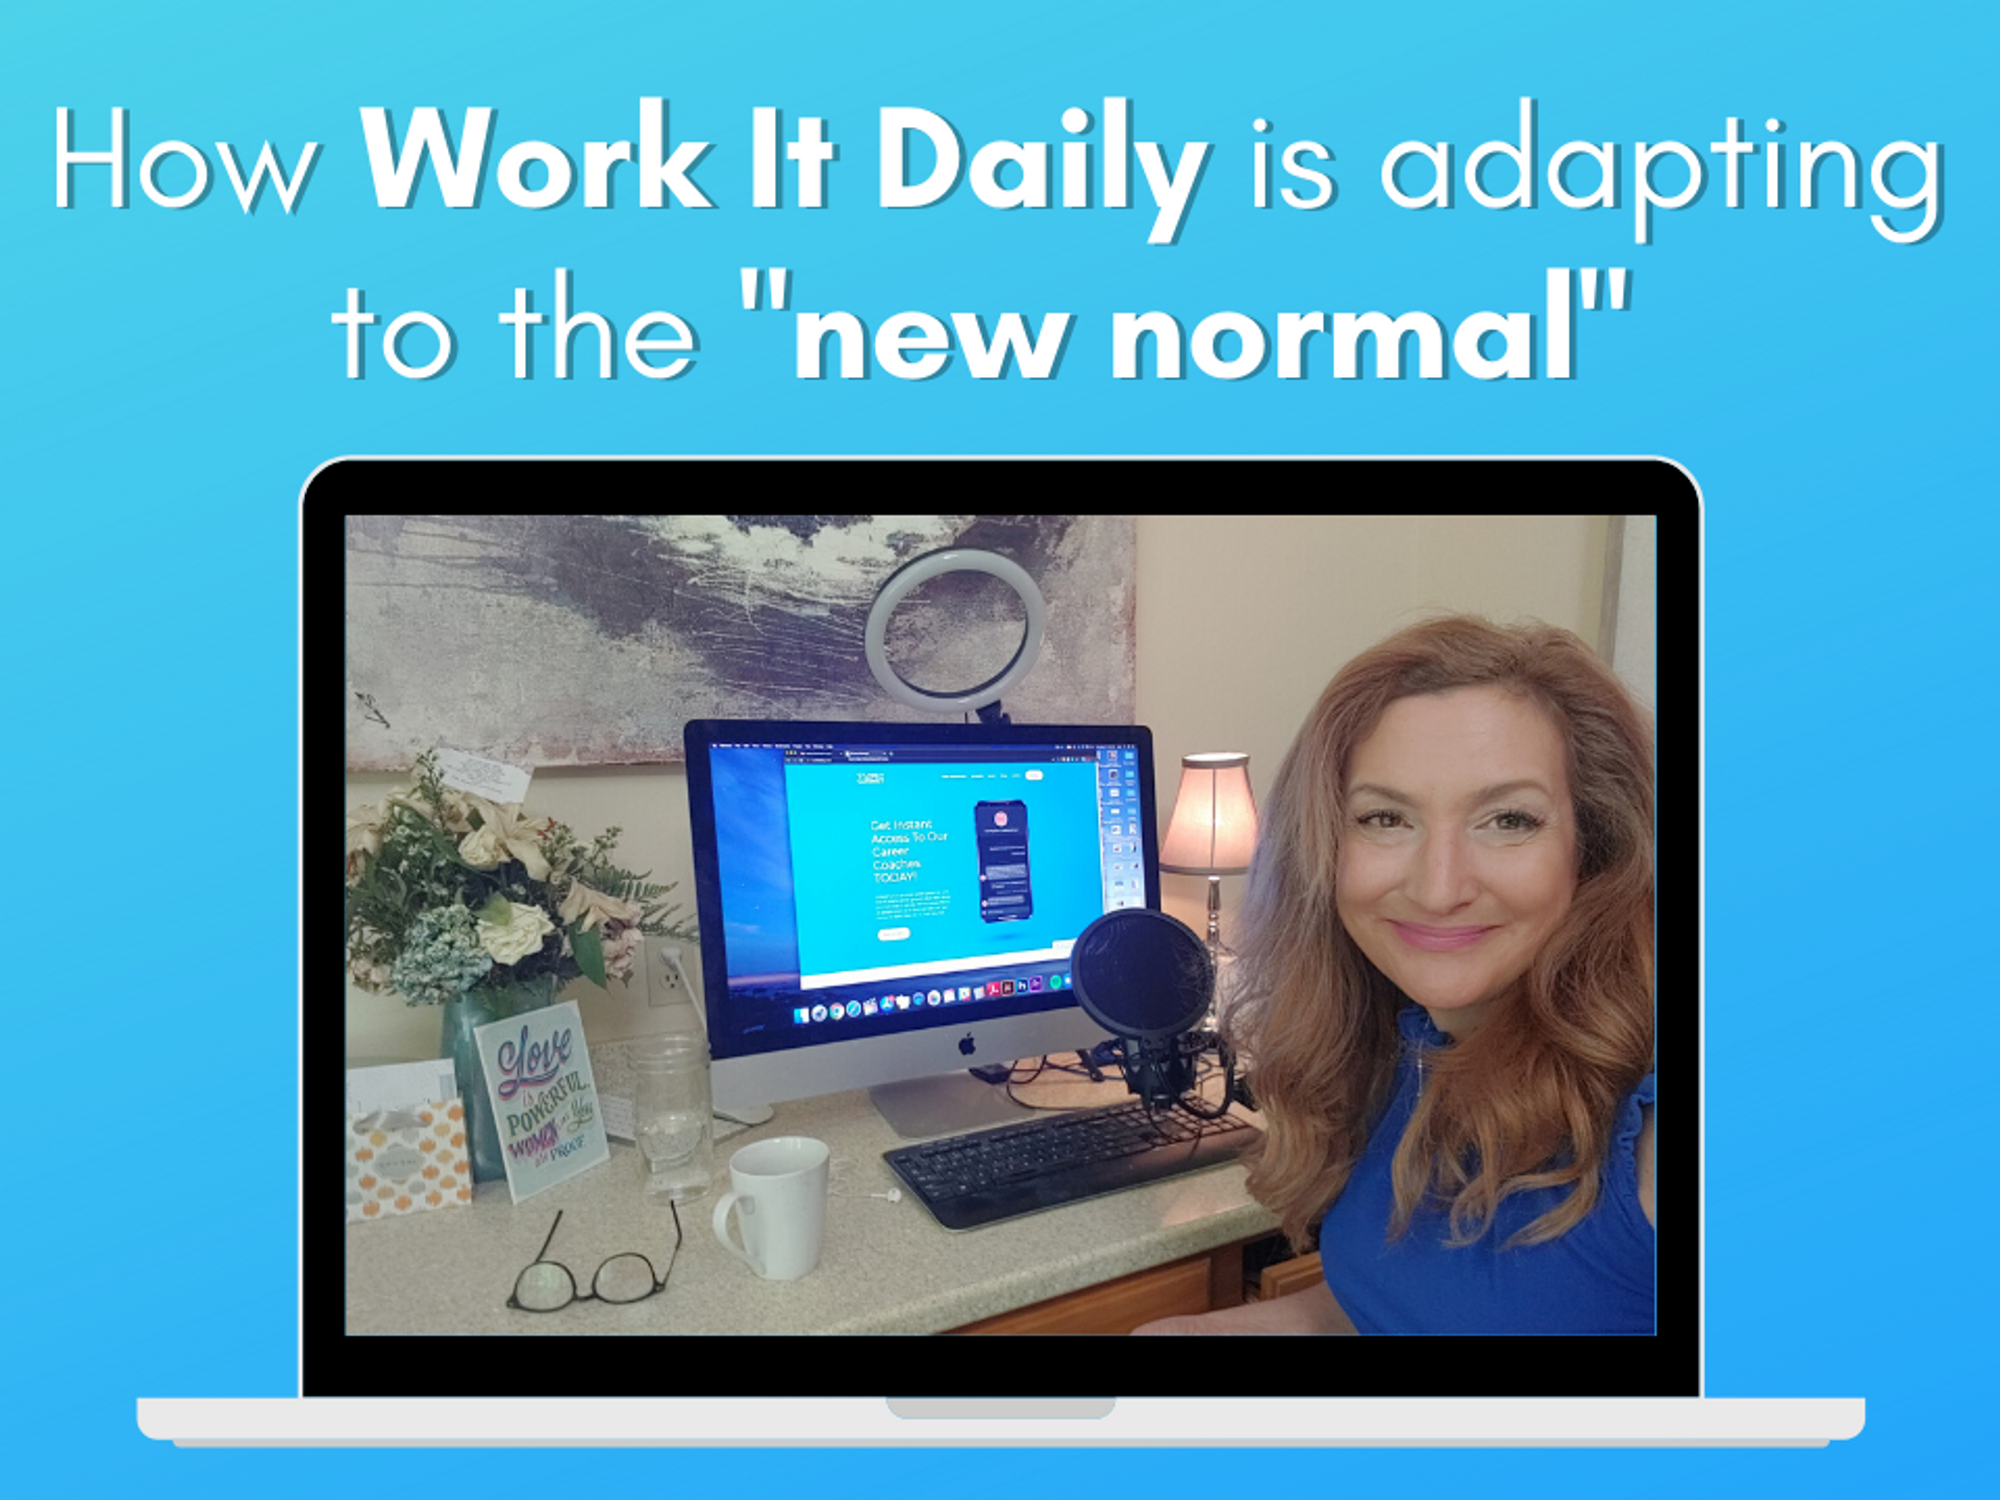 Work It Daily's staff is adapting to remote work.